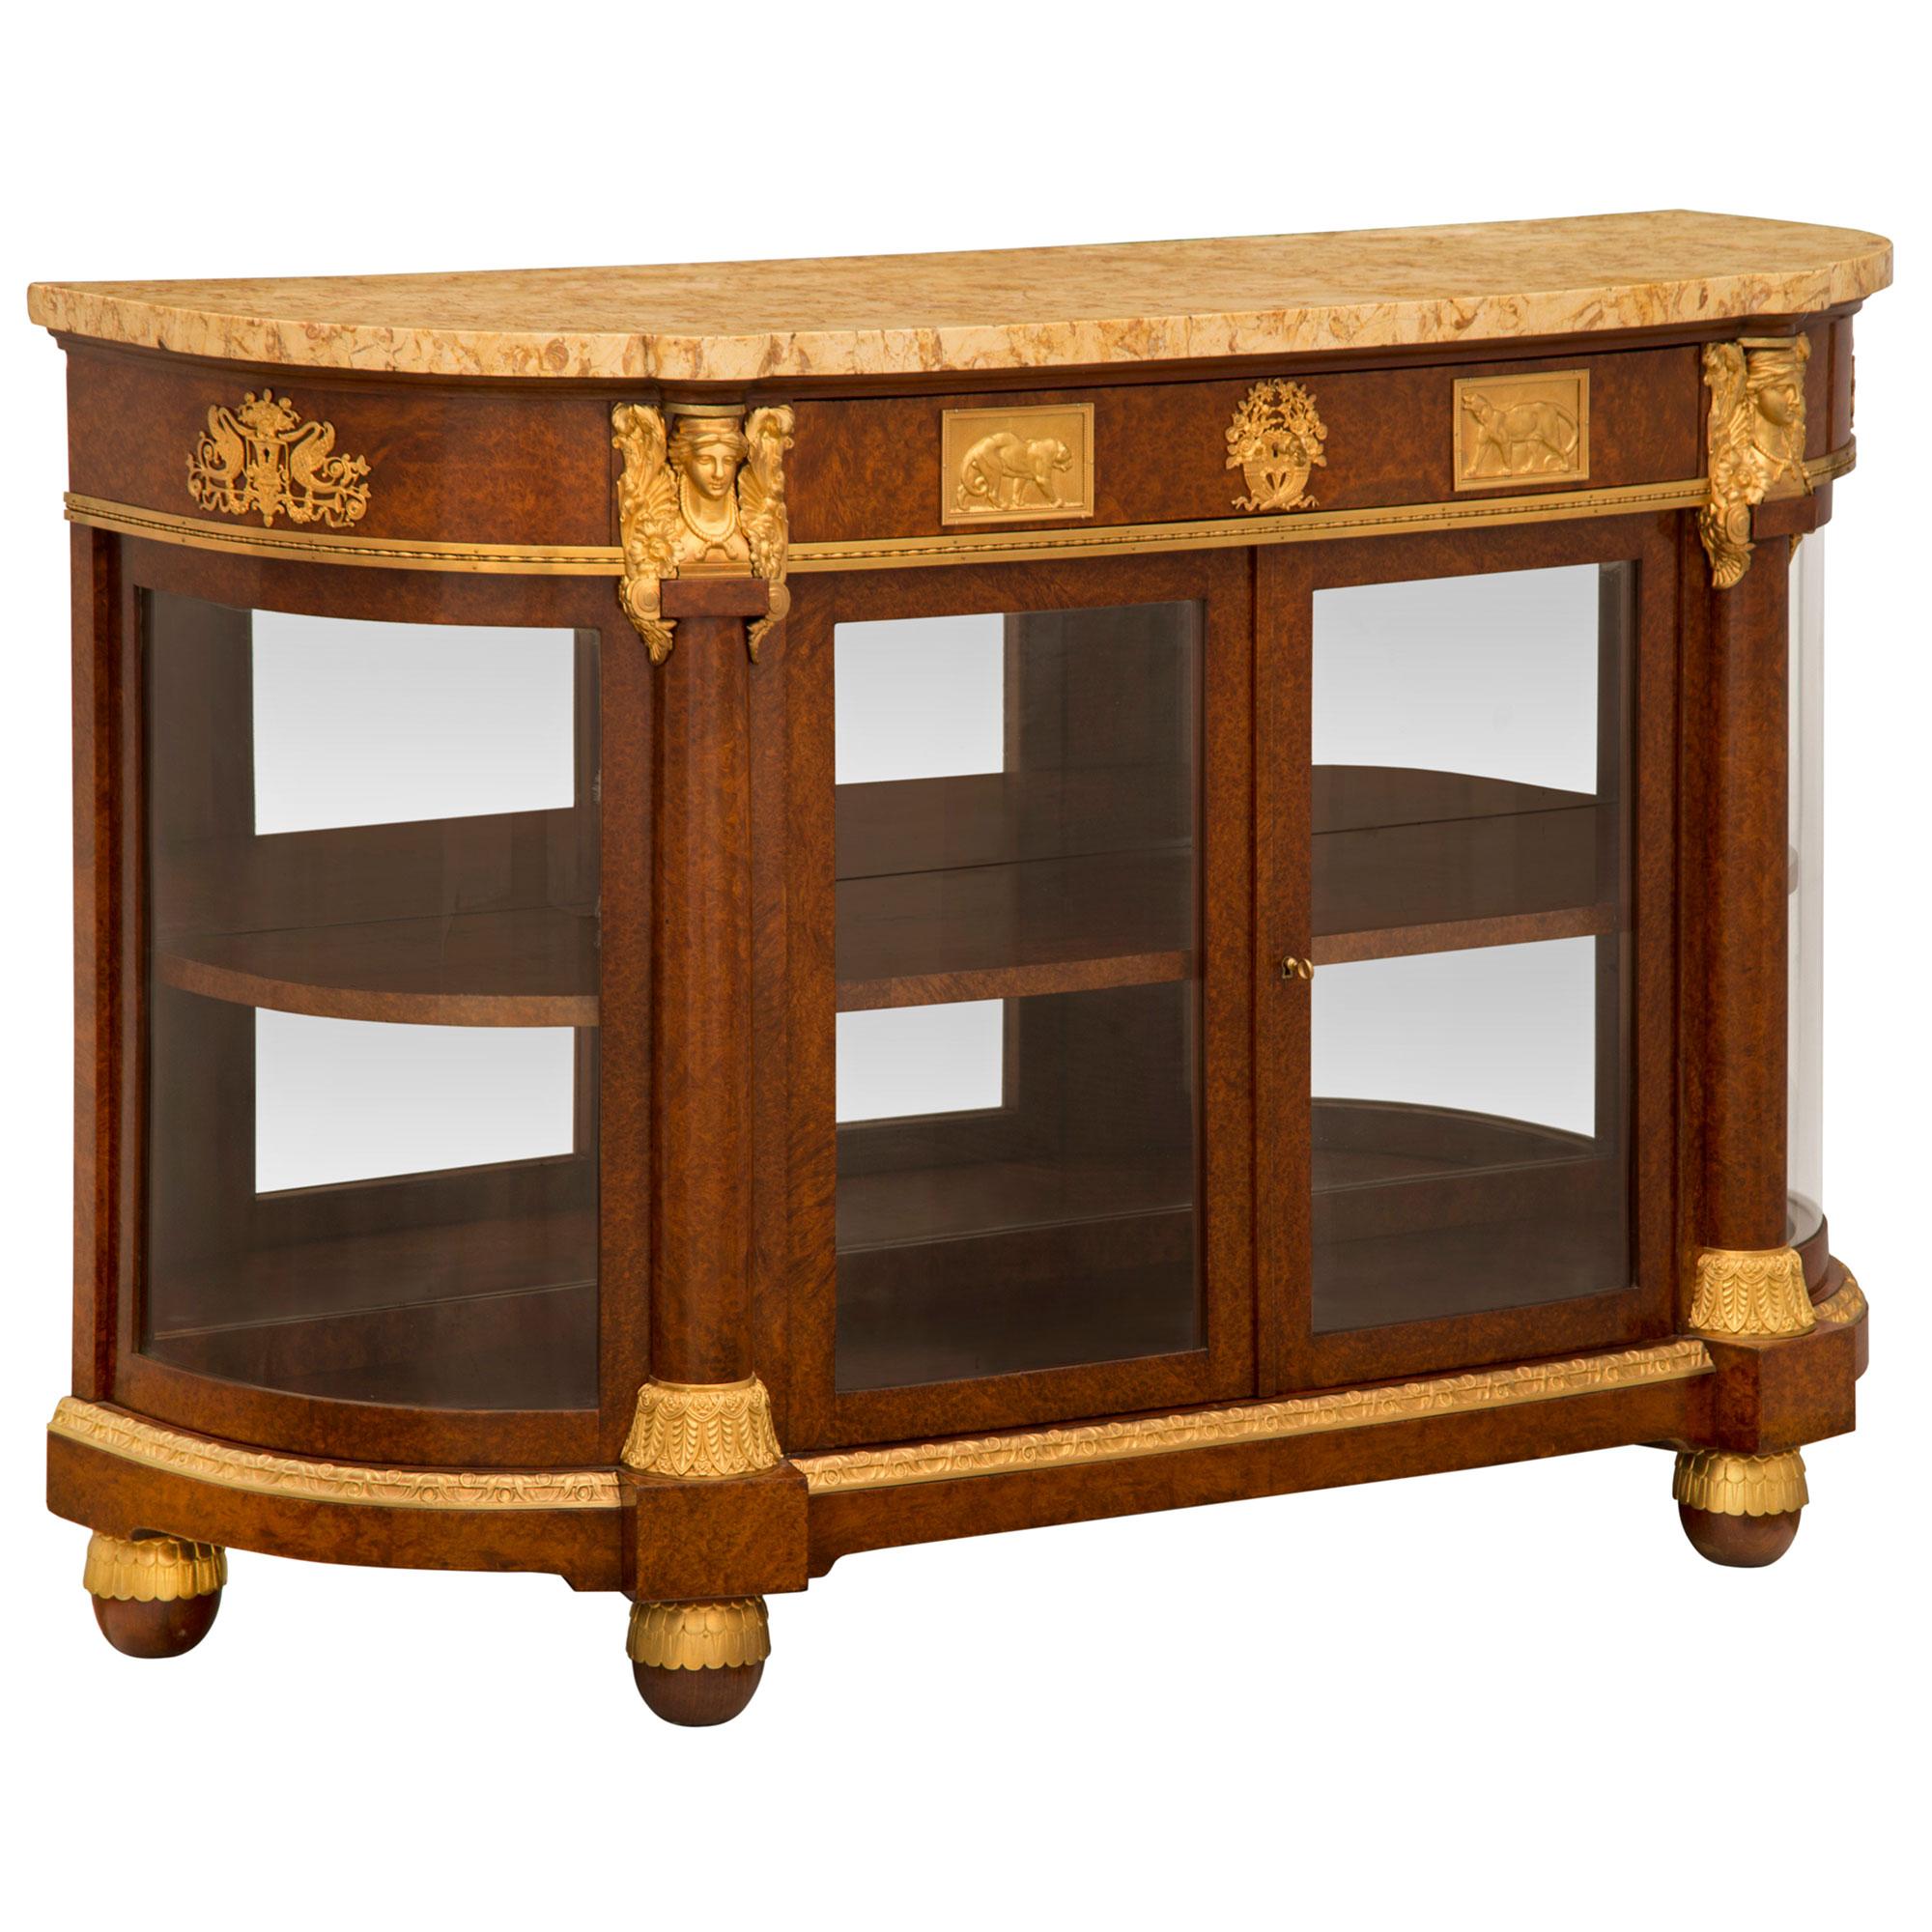 French 19th Century Neoclassical Style Burl Walnut and Ormolu Buffet Vitrine In Good Condition For Sale In West Palm Beach, FL